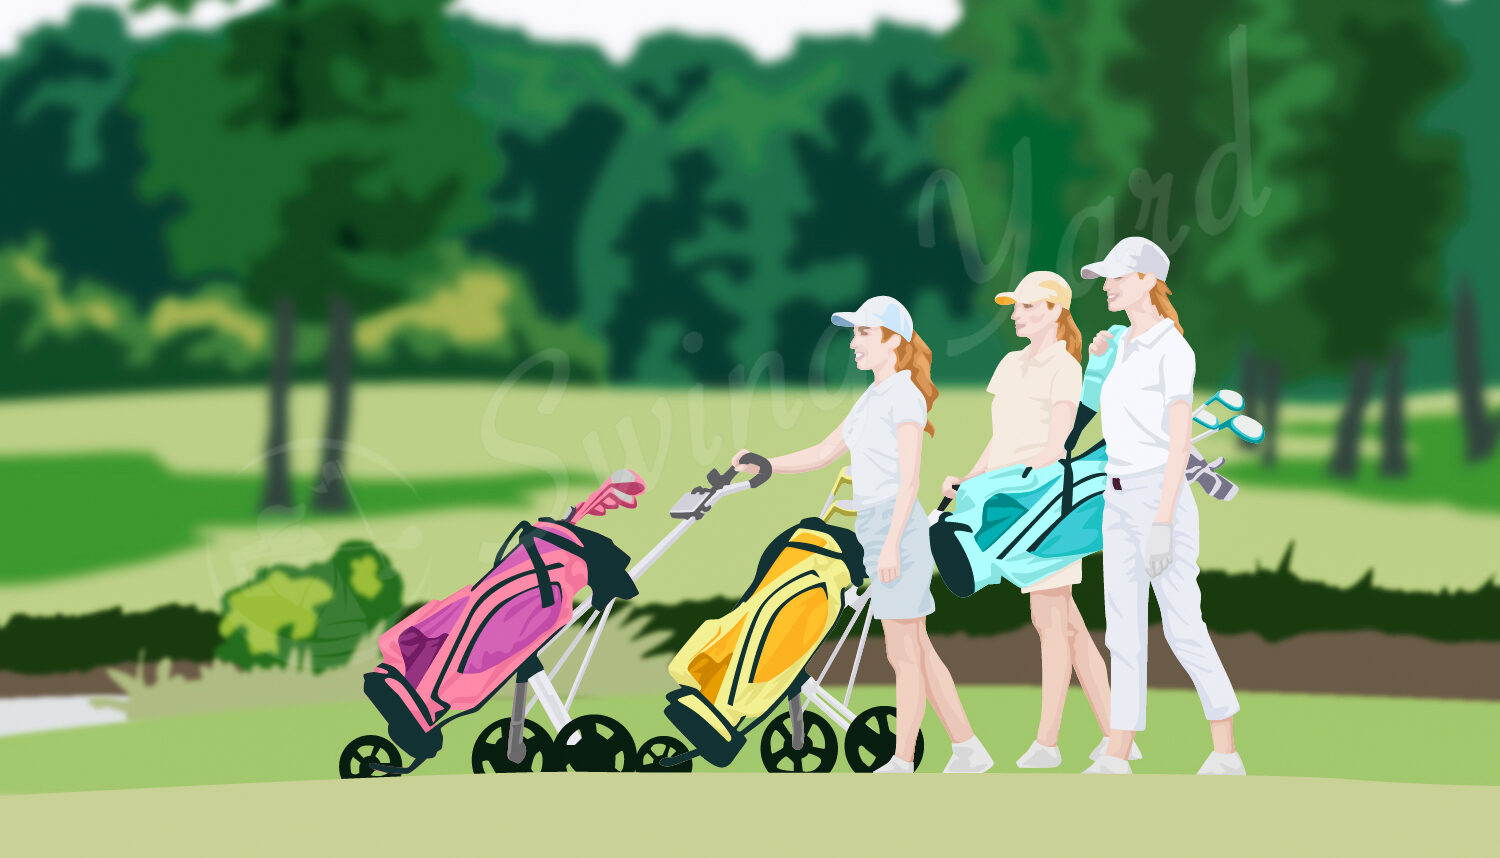 3 women playing golf with lady's clubs